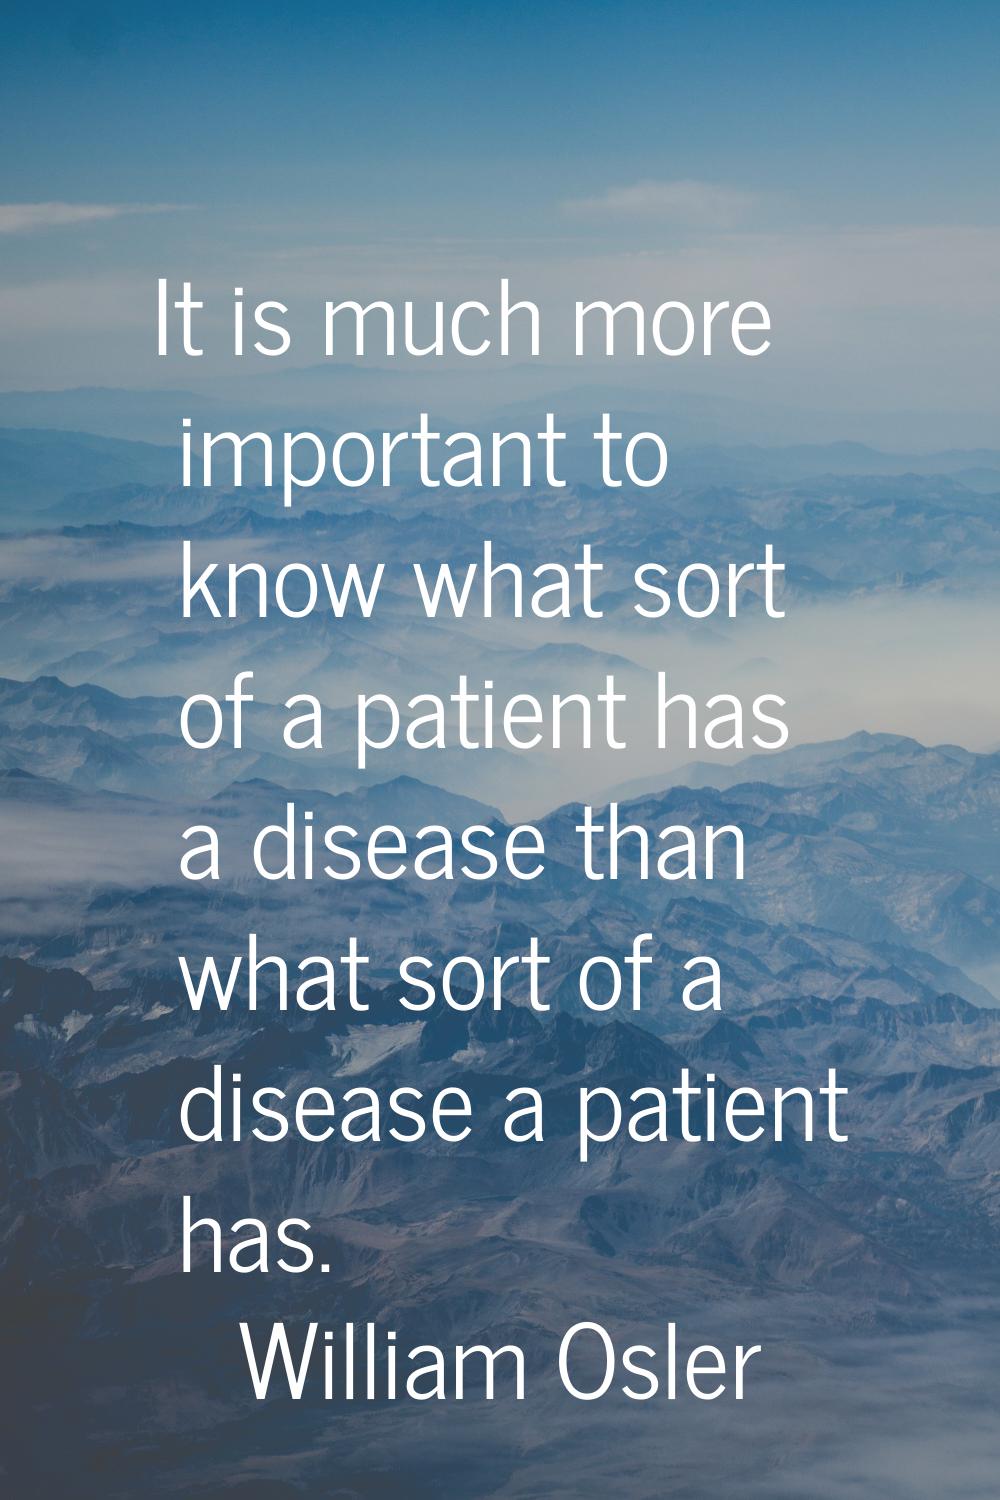 It is much more important to know what sort of a patient has a disease than what sort of a disease 